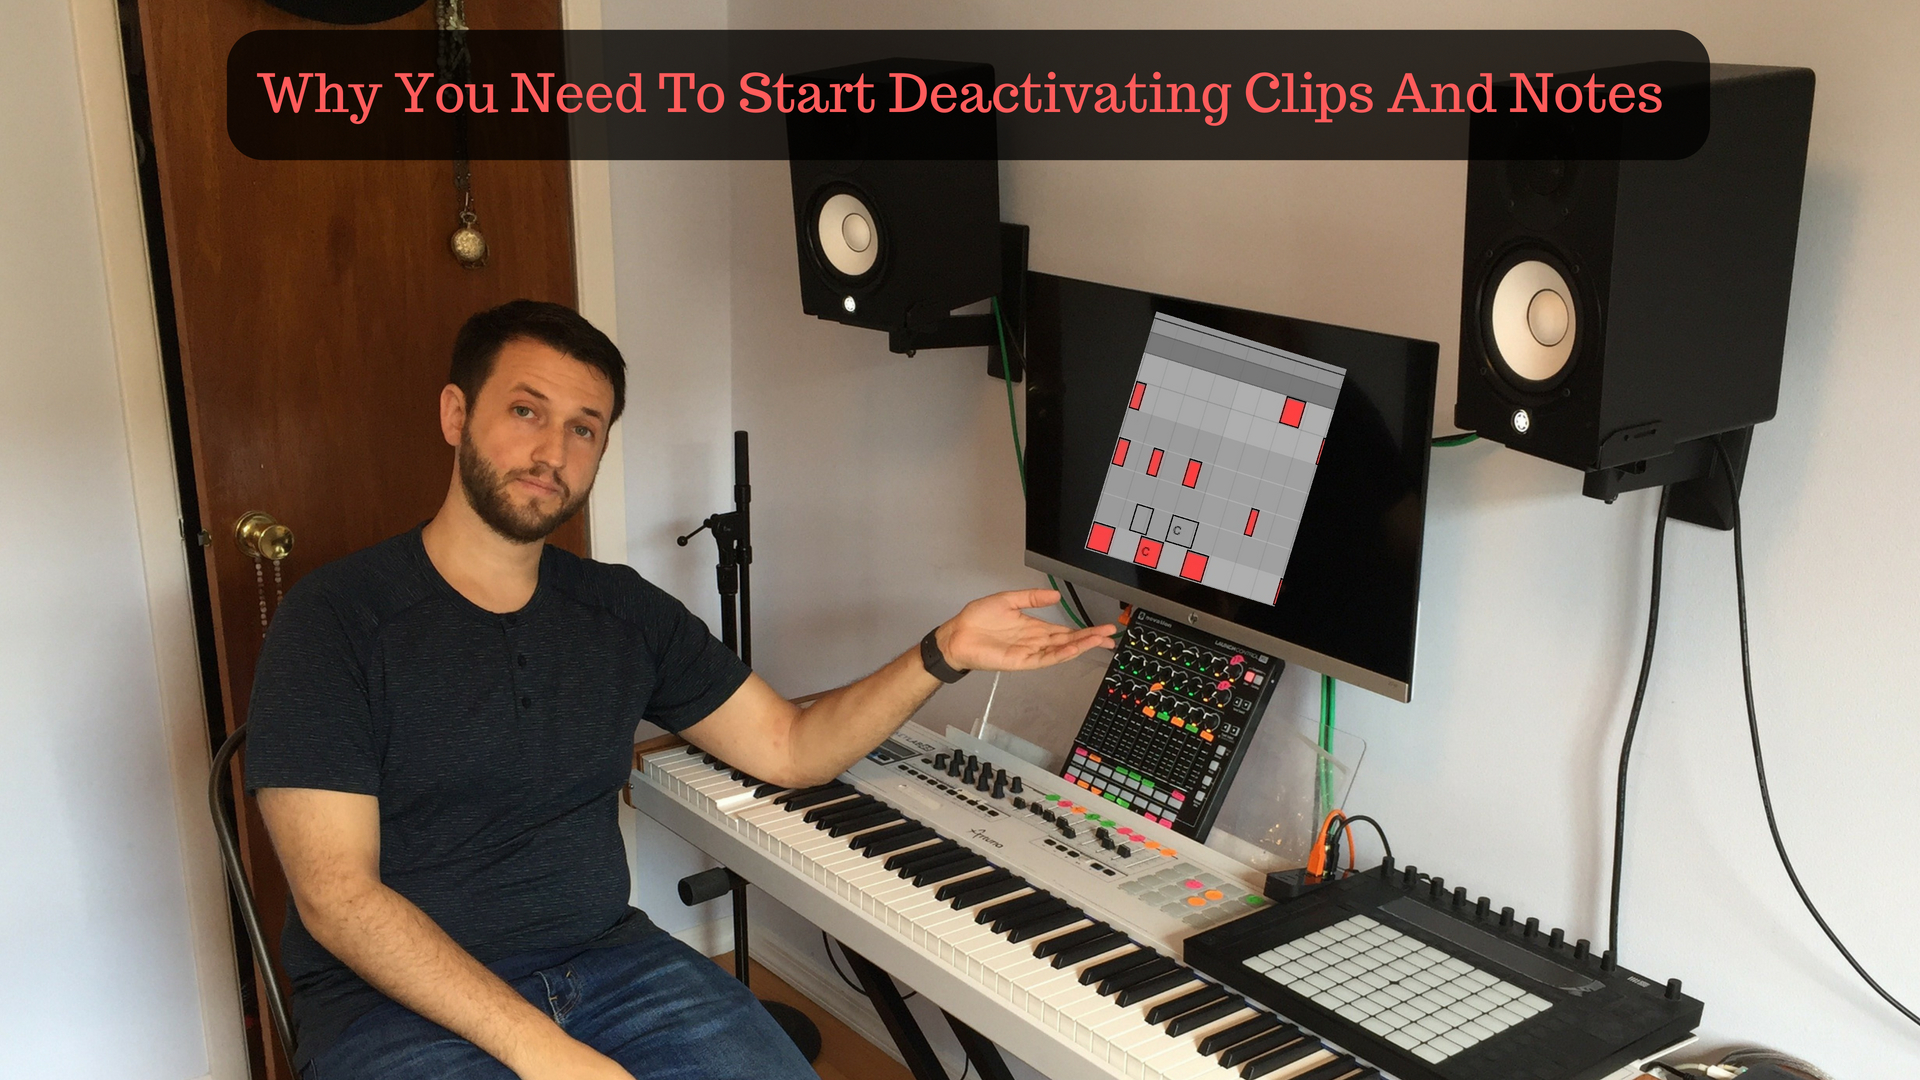 Why You Need To Start Deactivating Unused Clips And Notes